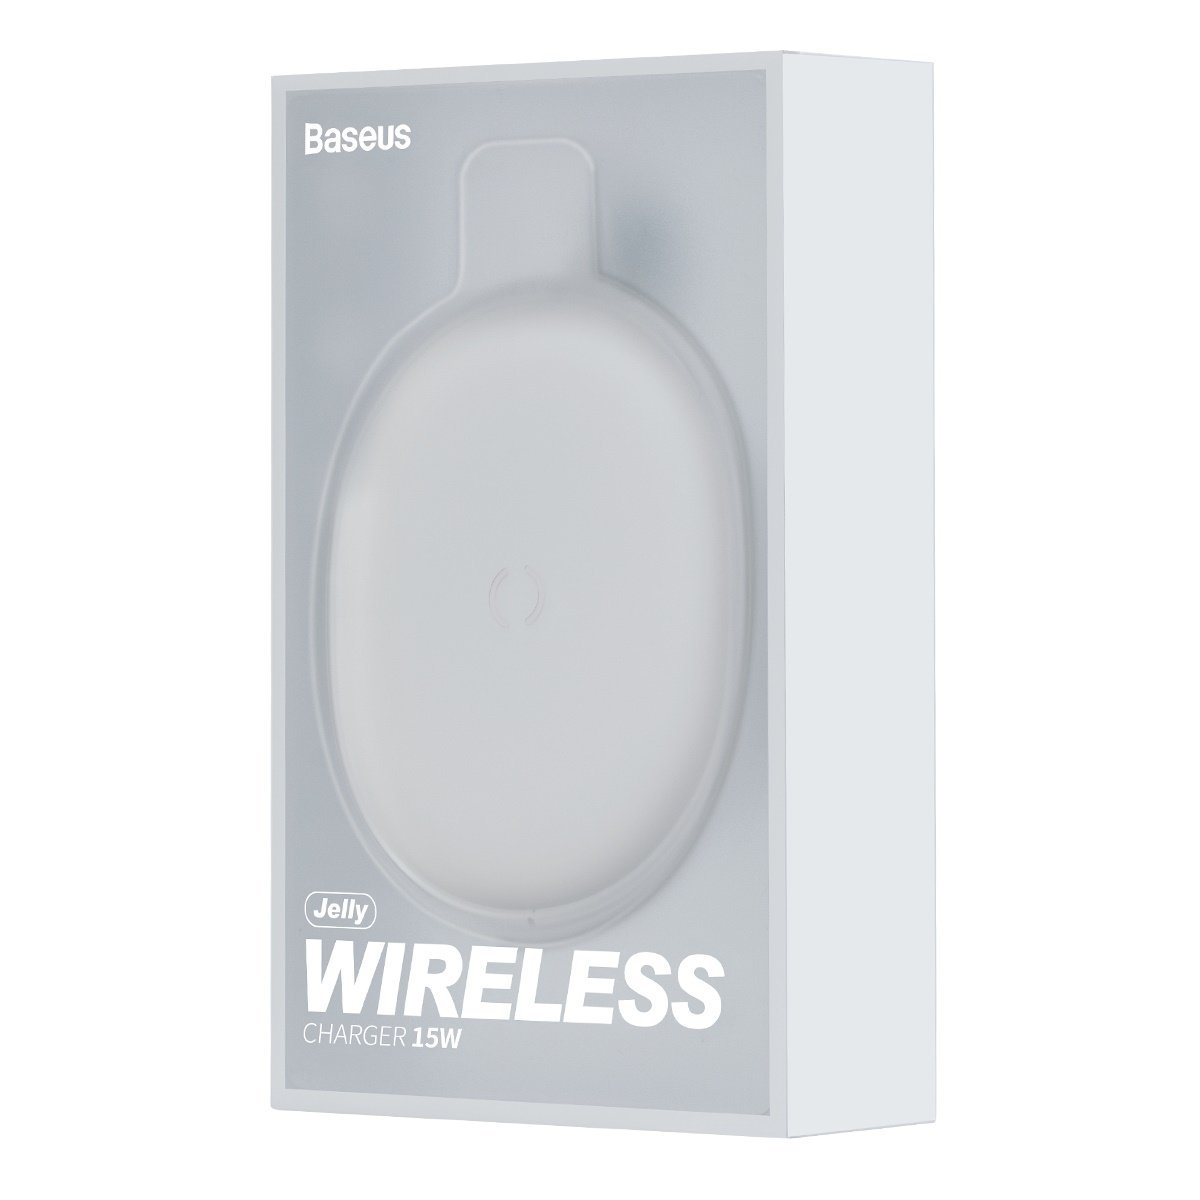 Baseus Jelly Wireless Qi 15W Inductive Mobile Phone Charger - White WXGD-02